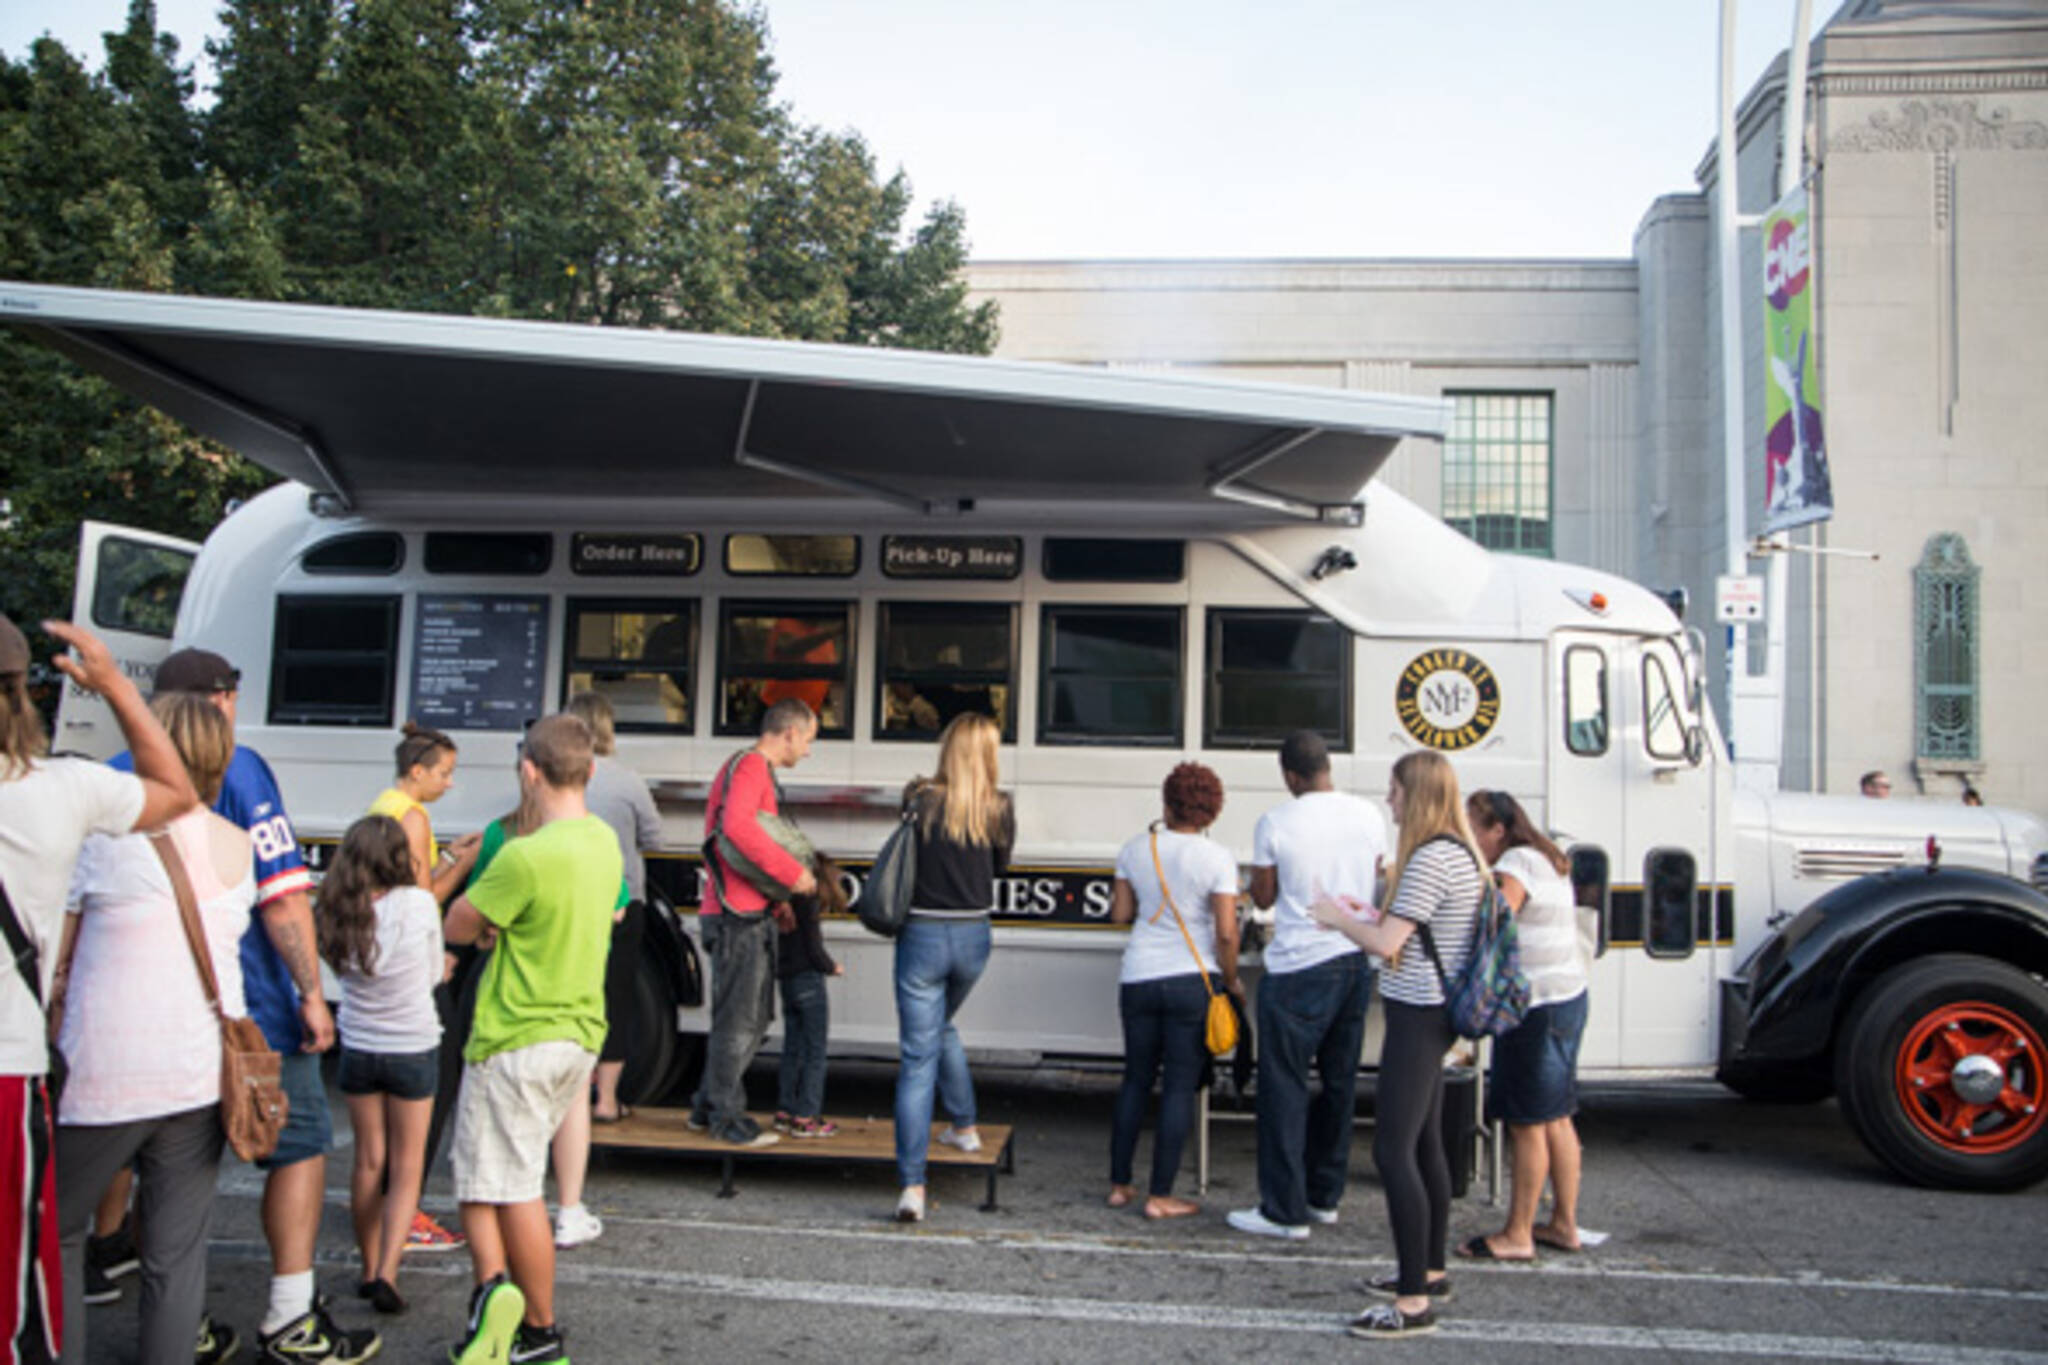 south st burger food truck